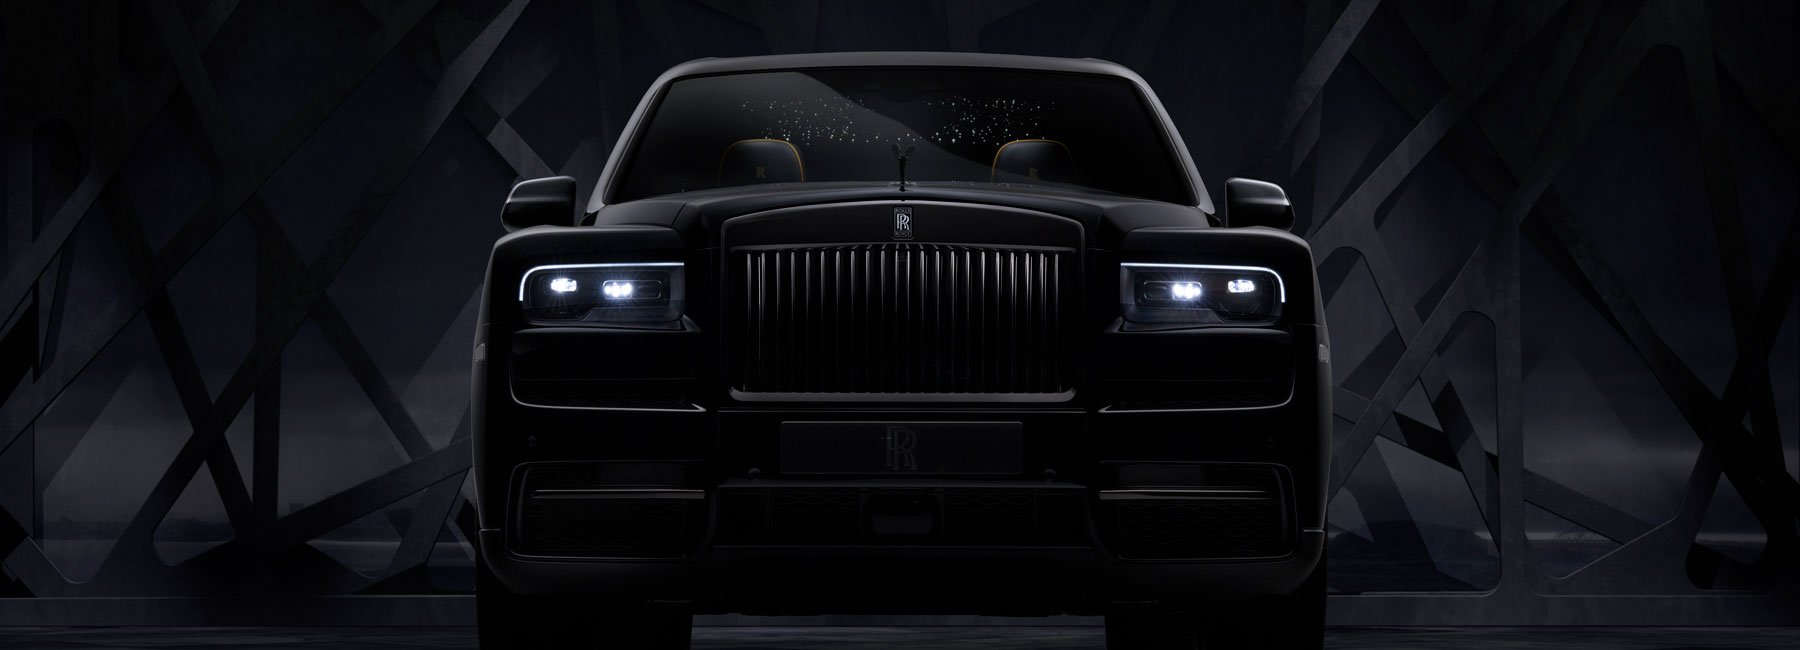 The Rolls Royce Cullinan Uses 1344 Lights To Create Starry